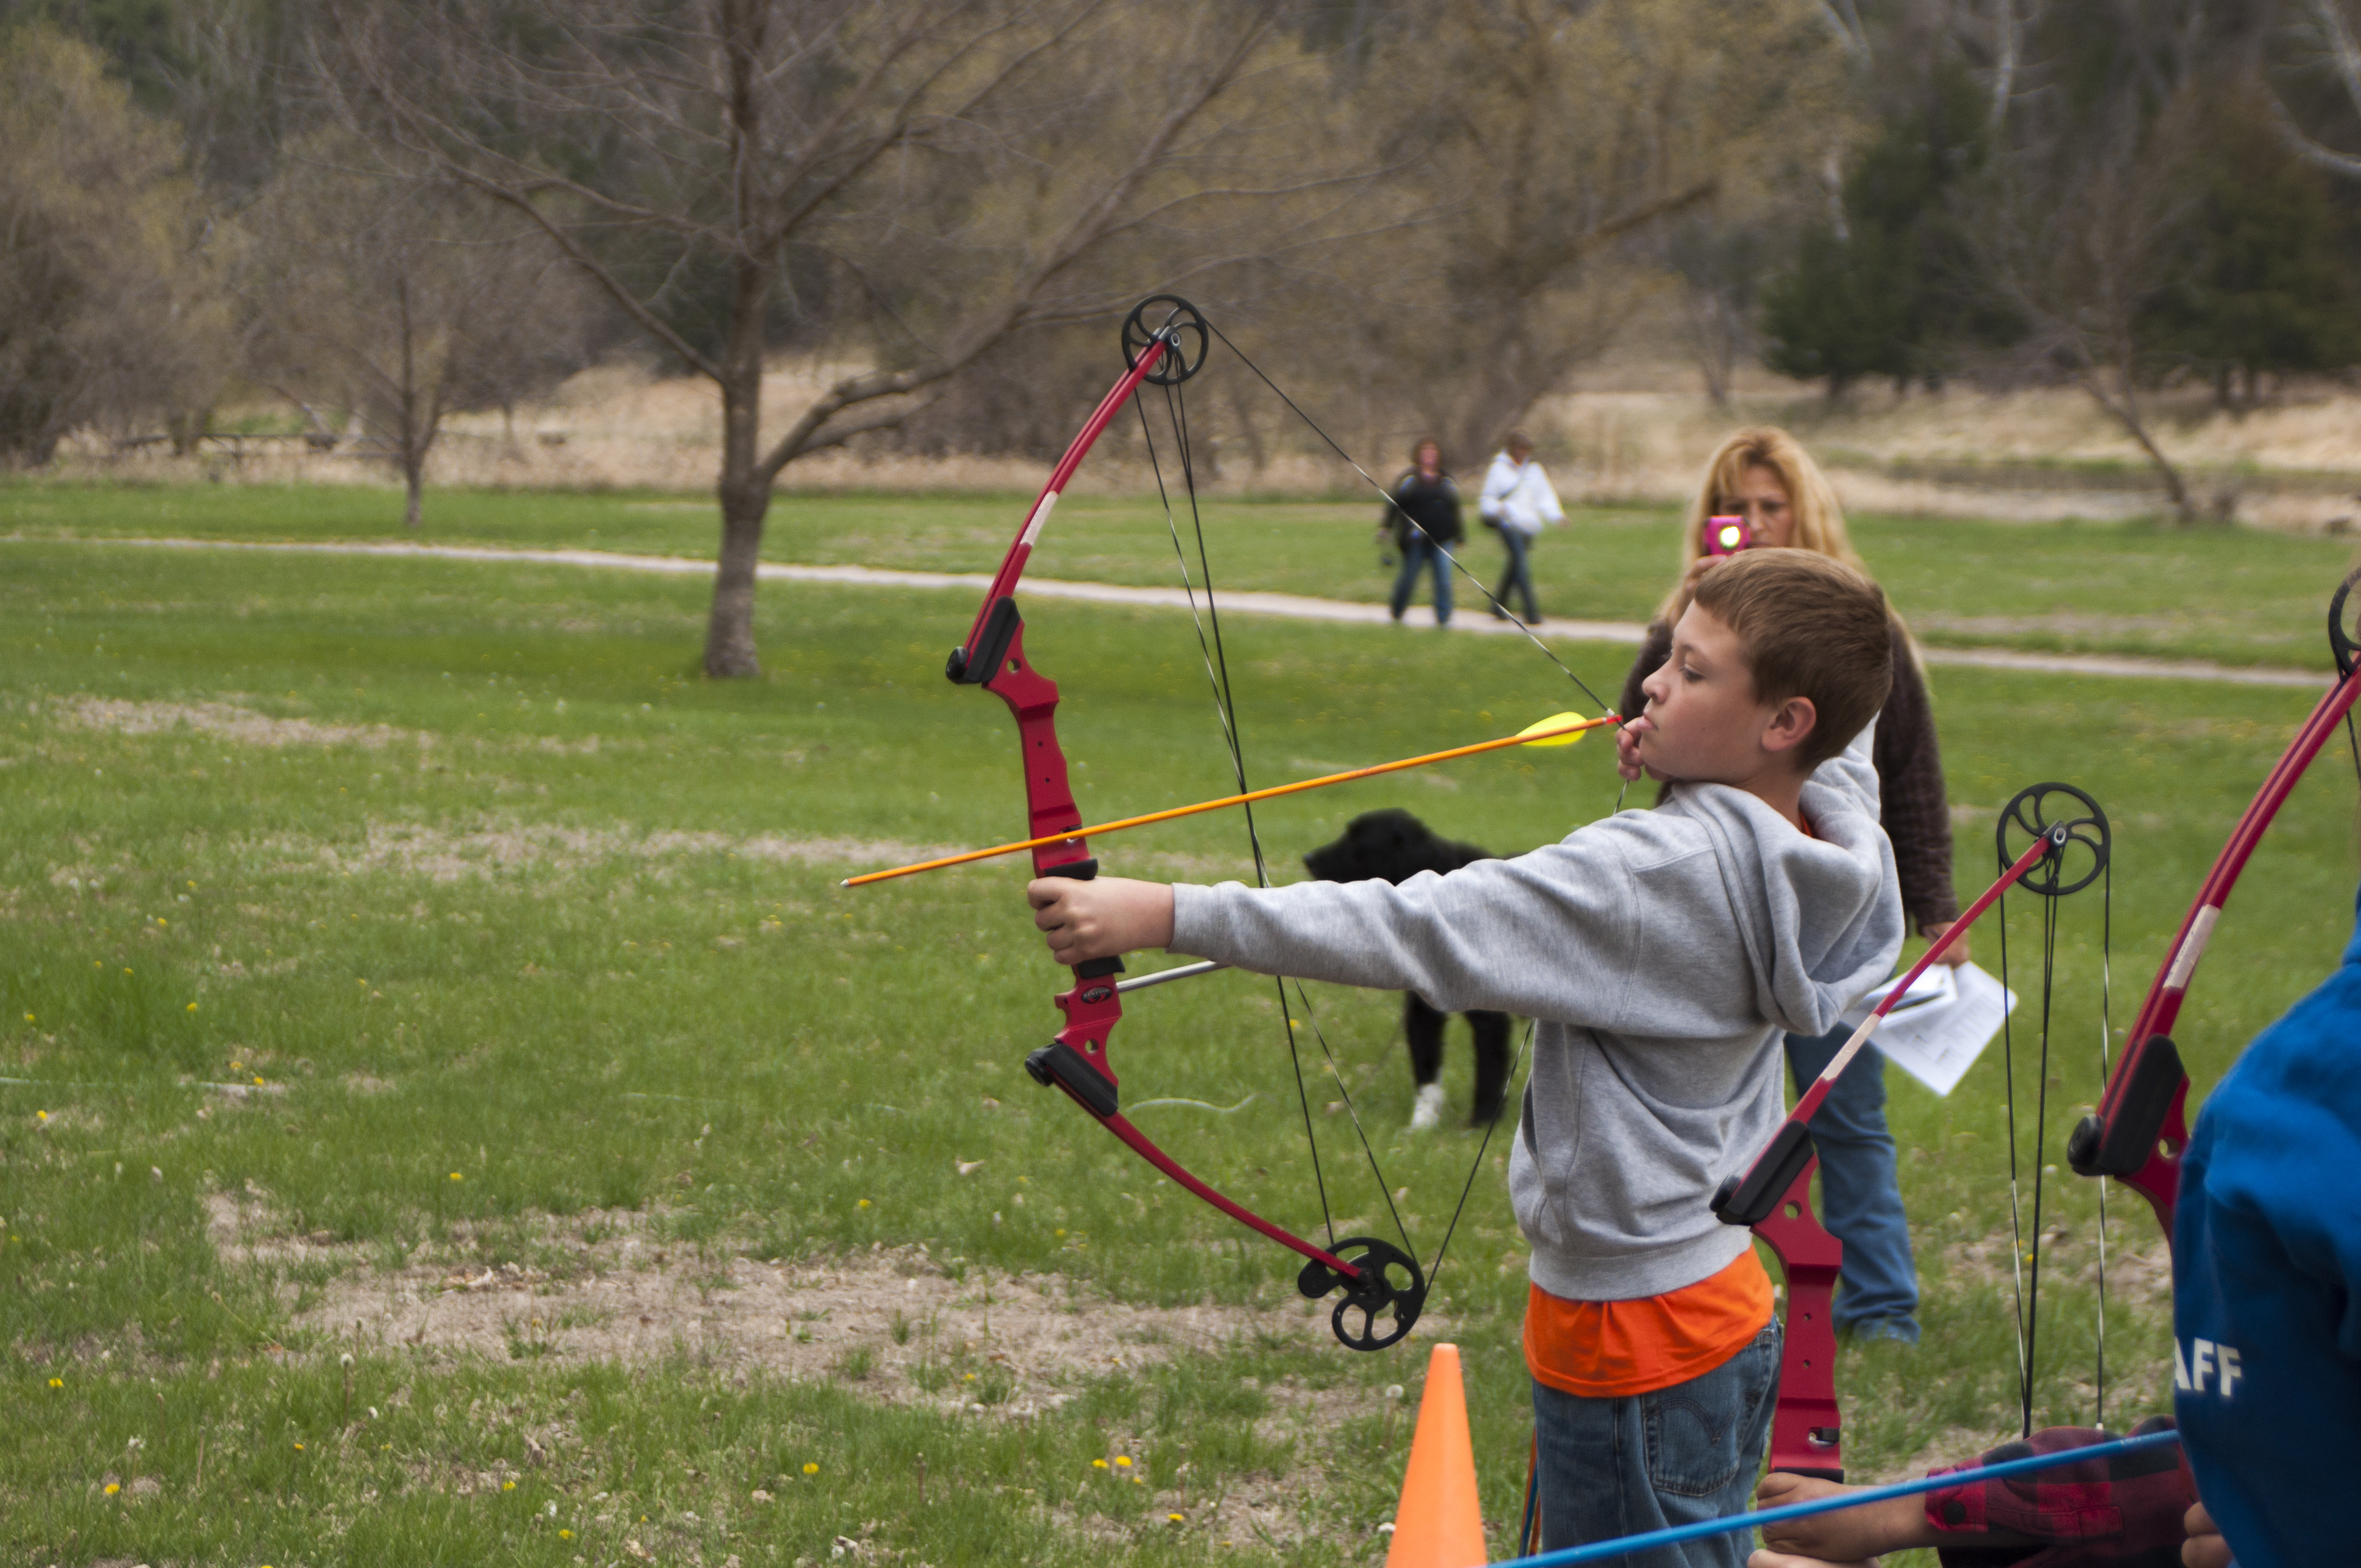 A boy lifts a bow to aim an arrow at a target at the Archery station.